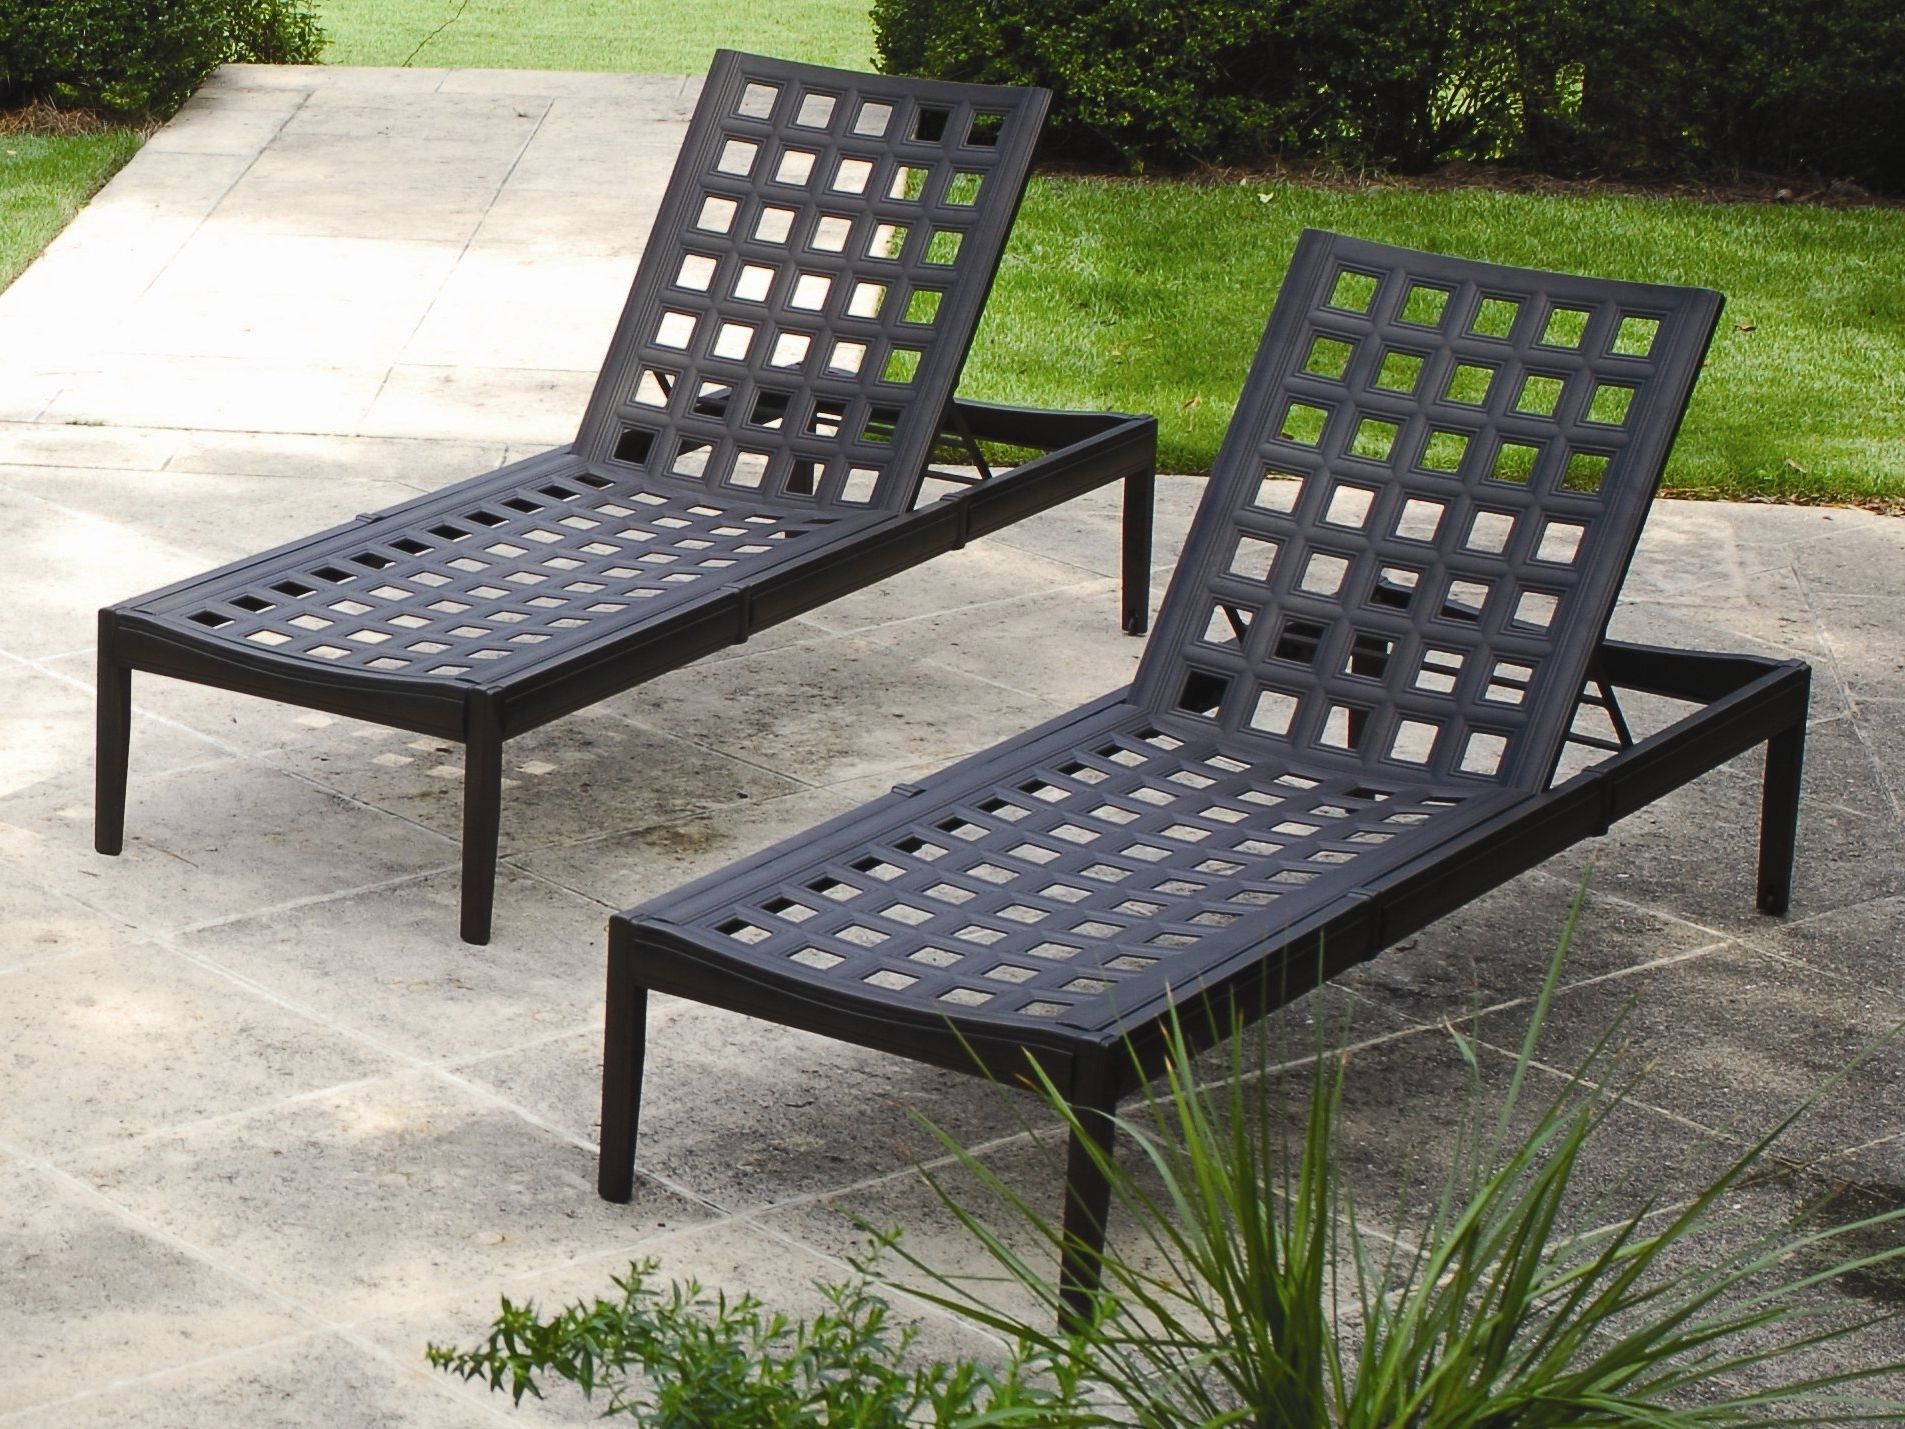 Aluminum Chaise Lounge Outdoor Chairs Within Well Known Cast Aluminum Chaise Lounge Chairs • Lounge Chairs Ideas (View 13 of 15)